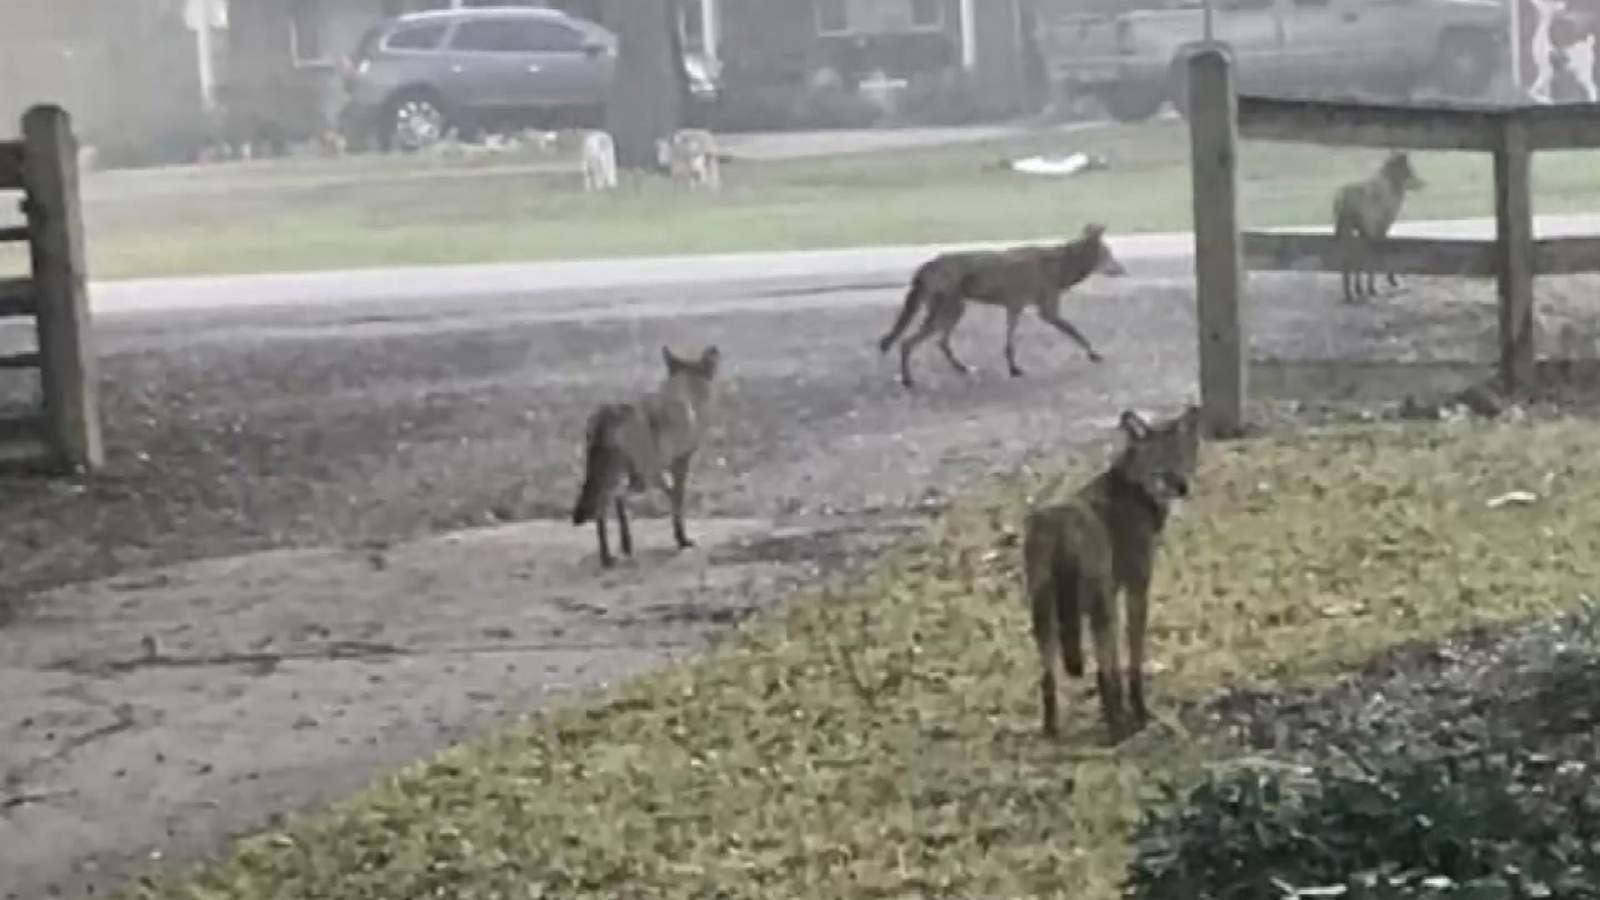 Rice University warns students about coyote sightings on campus